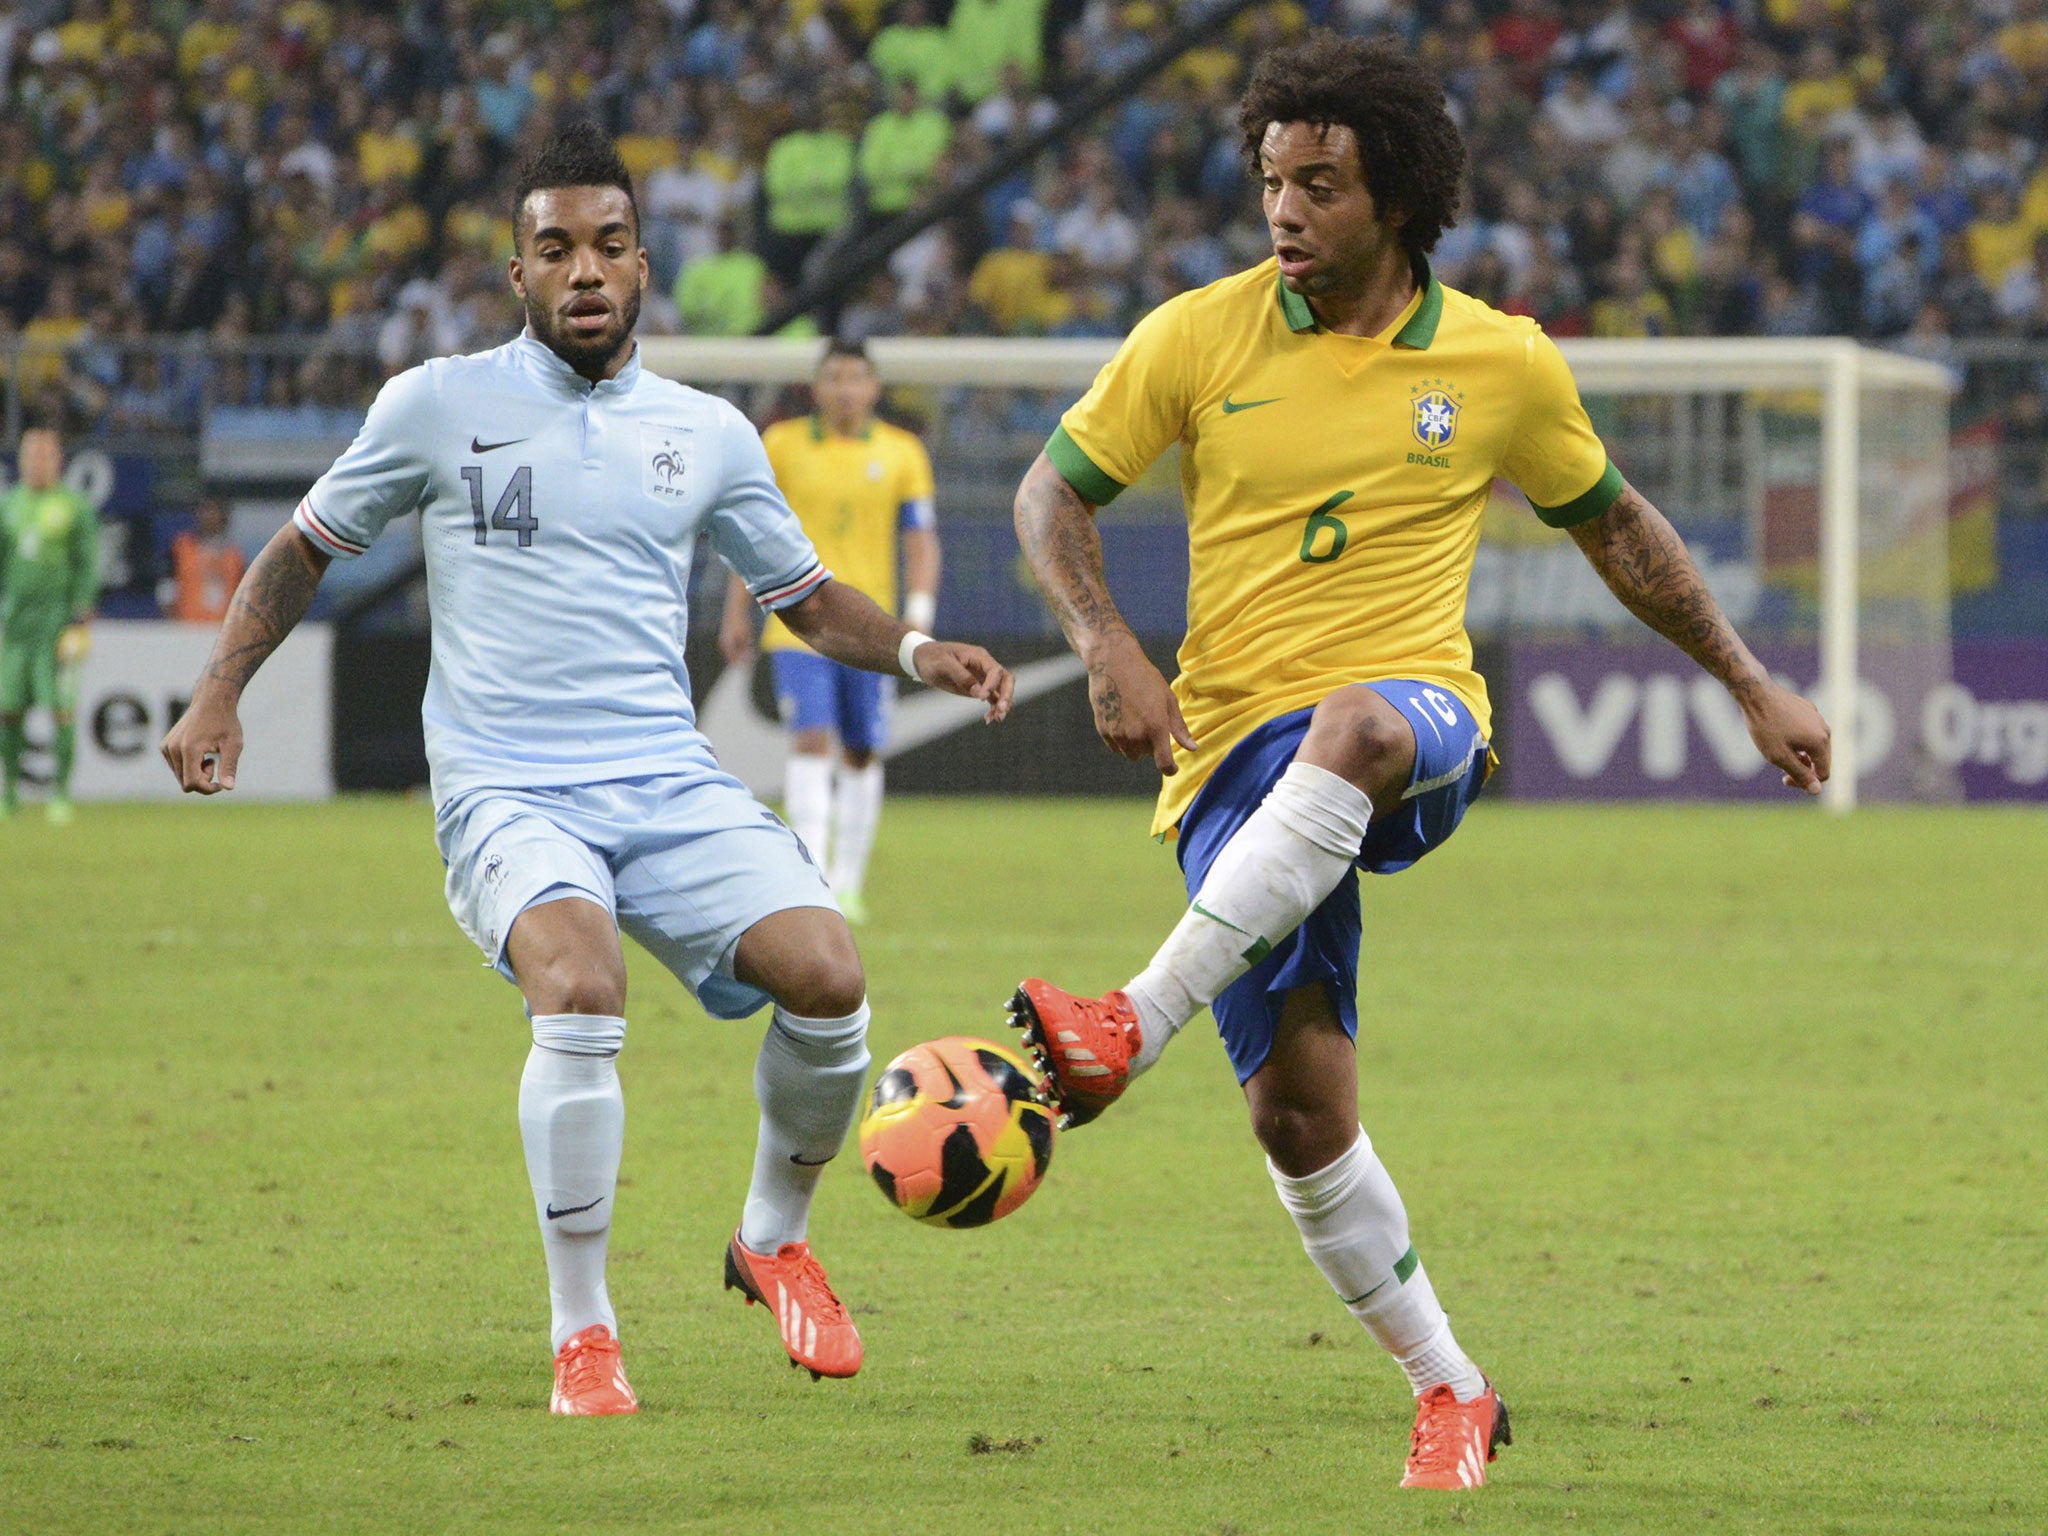 Marcelo, right, of Brasil fights for the ball during the friendly match between Brasil and France